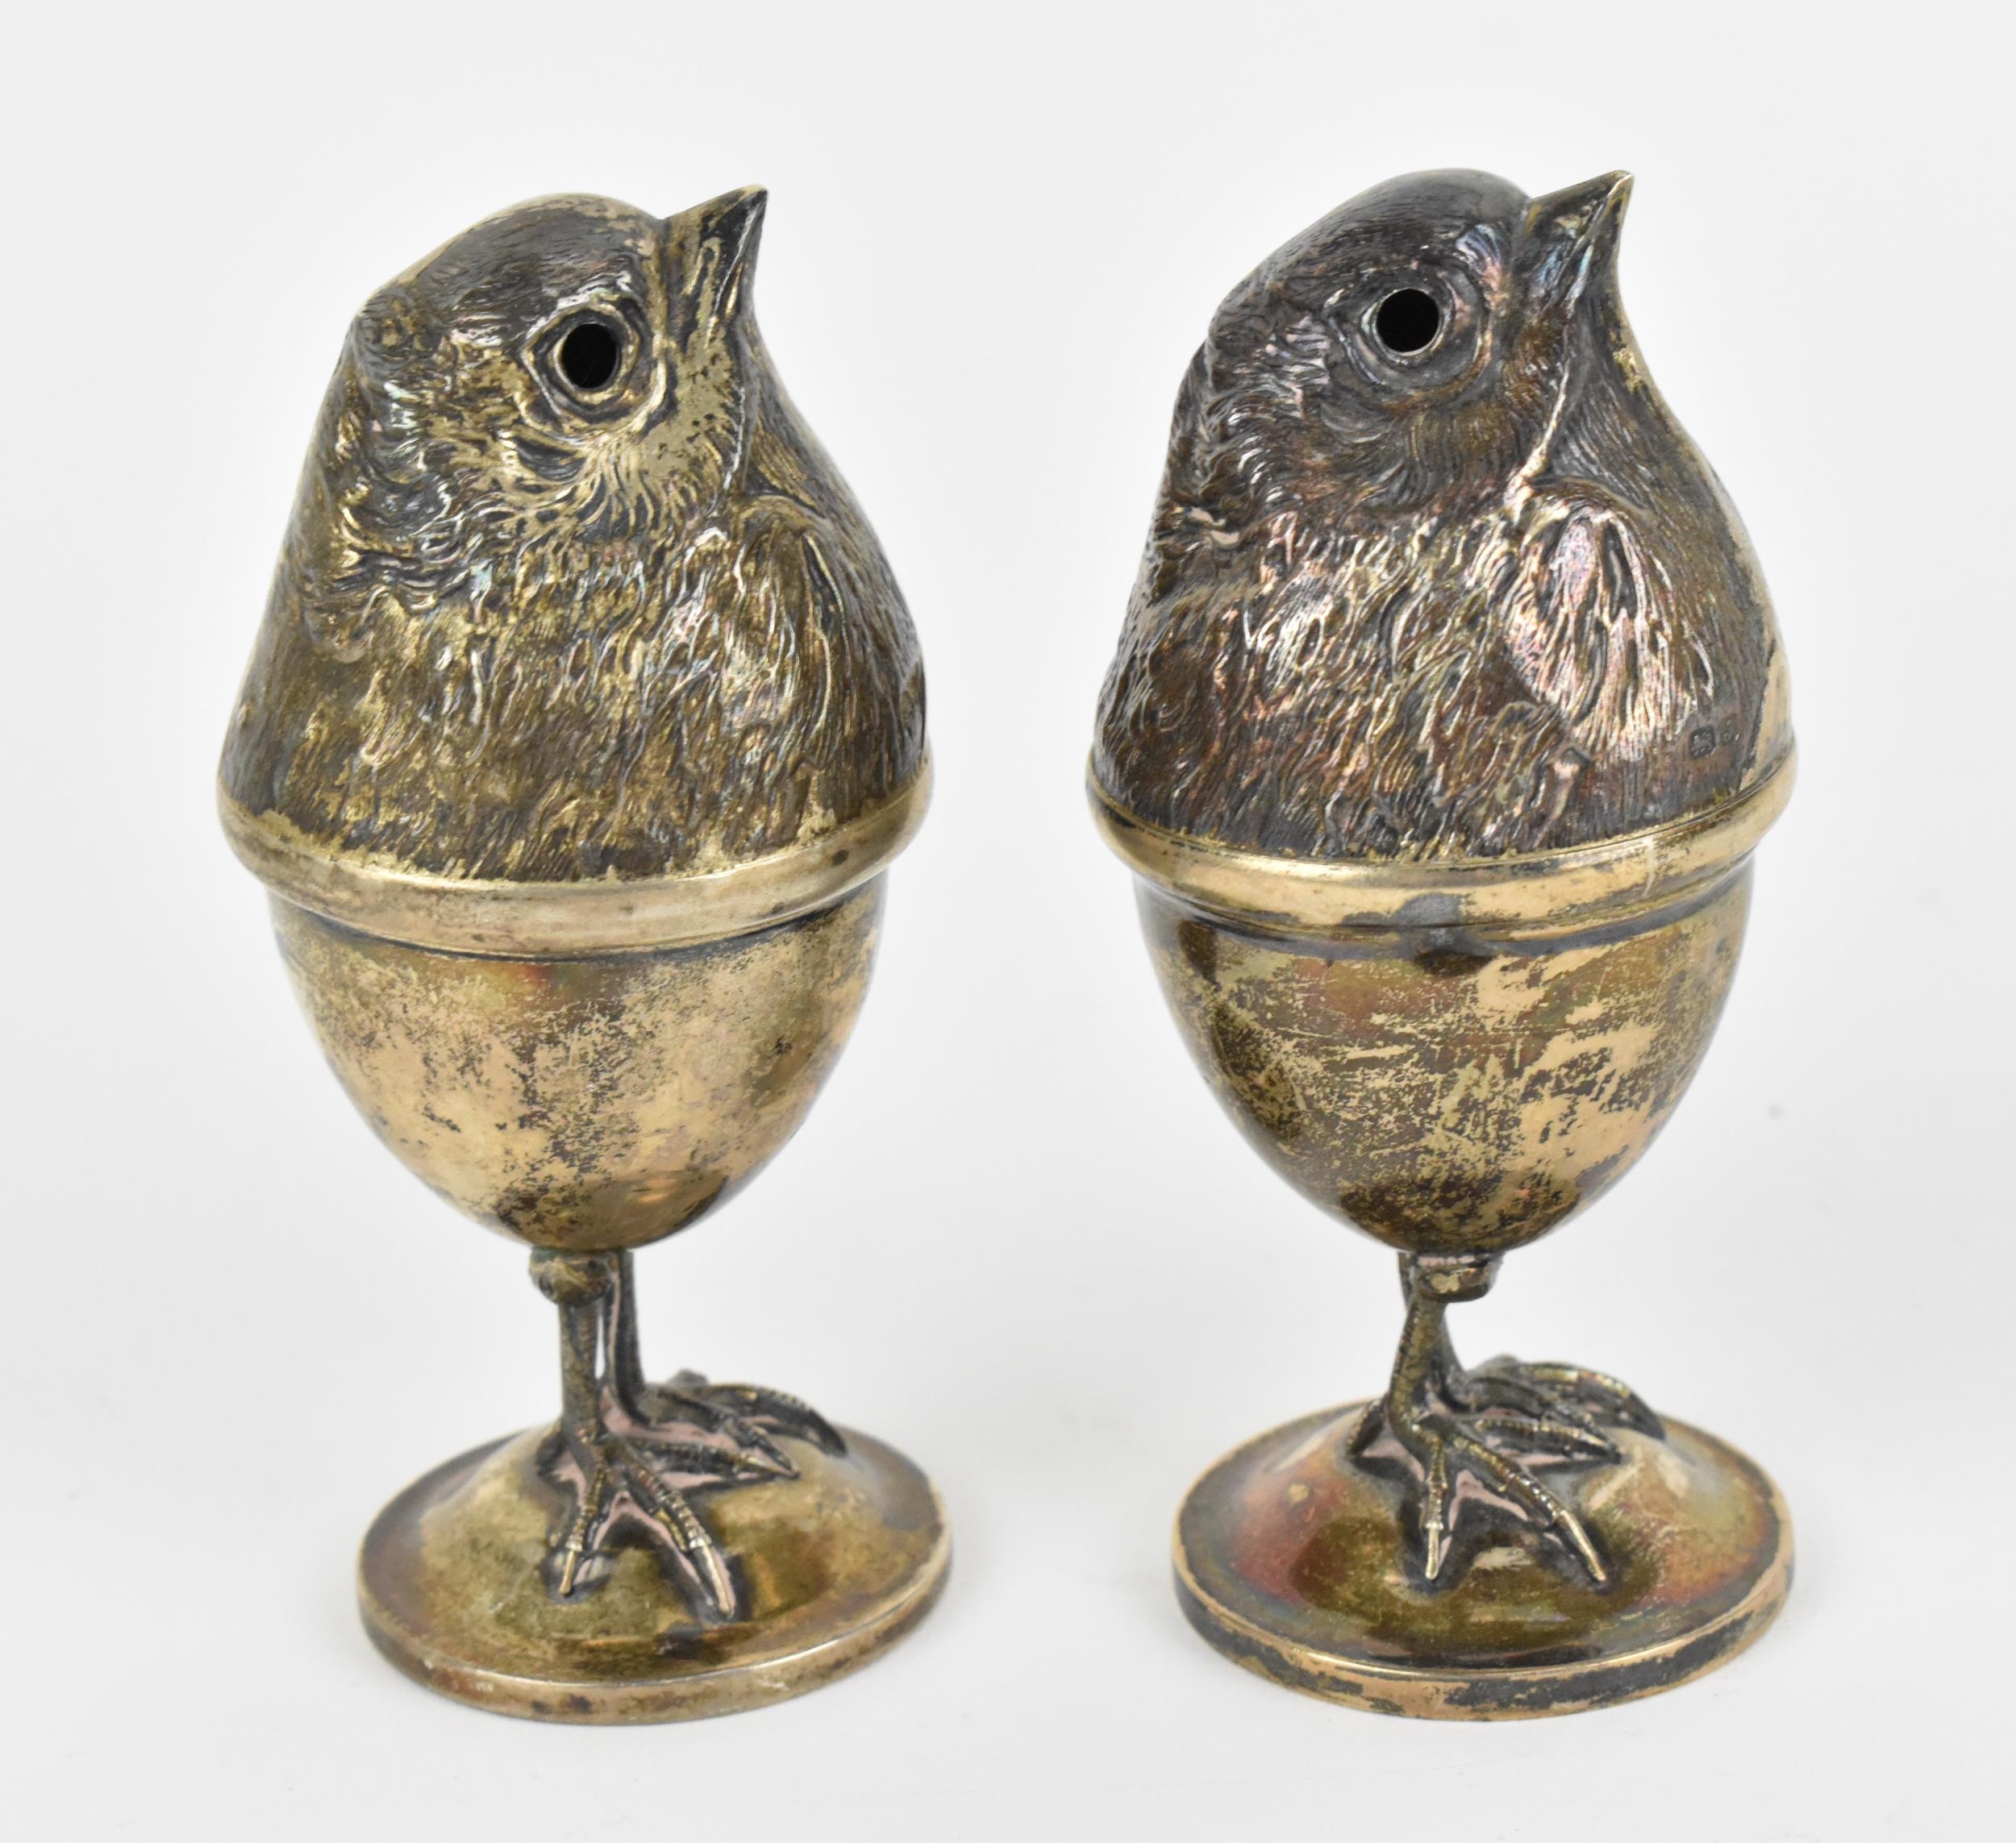 Two Edwardian silver novelty egg cups by Sampson Mordan & Co Ltd, Chester 1909, modelled as - Image 5 of 8